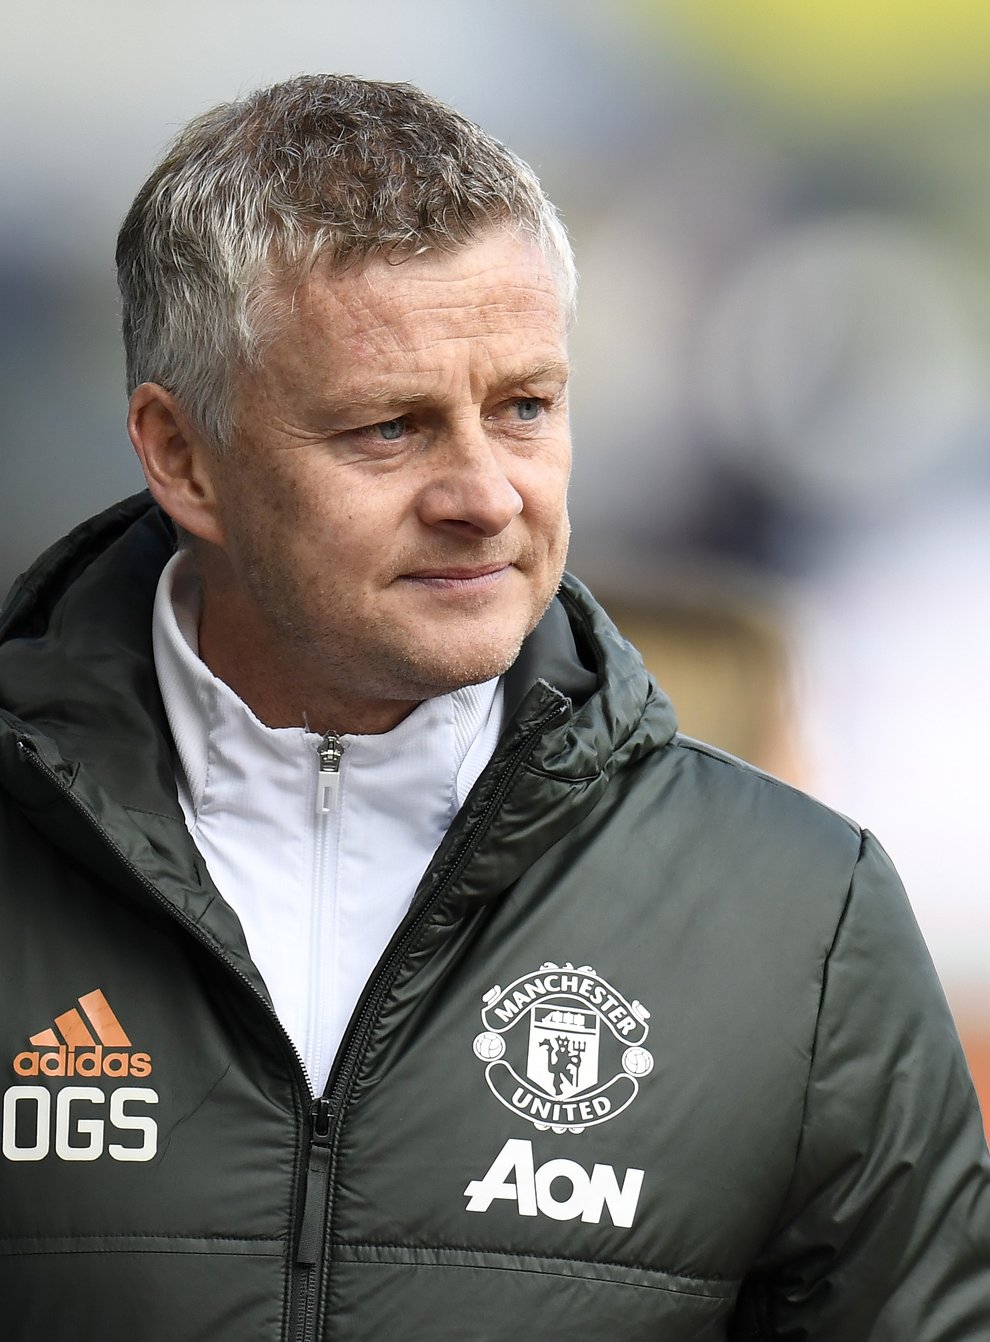 Ole Gunnar Solskjaer hopes any Manchester United protests this week remain peaceful